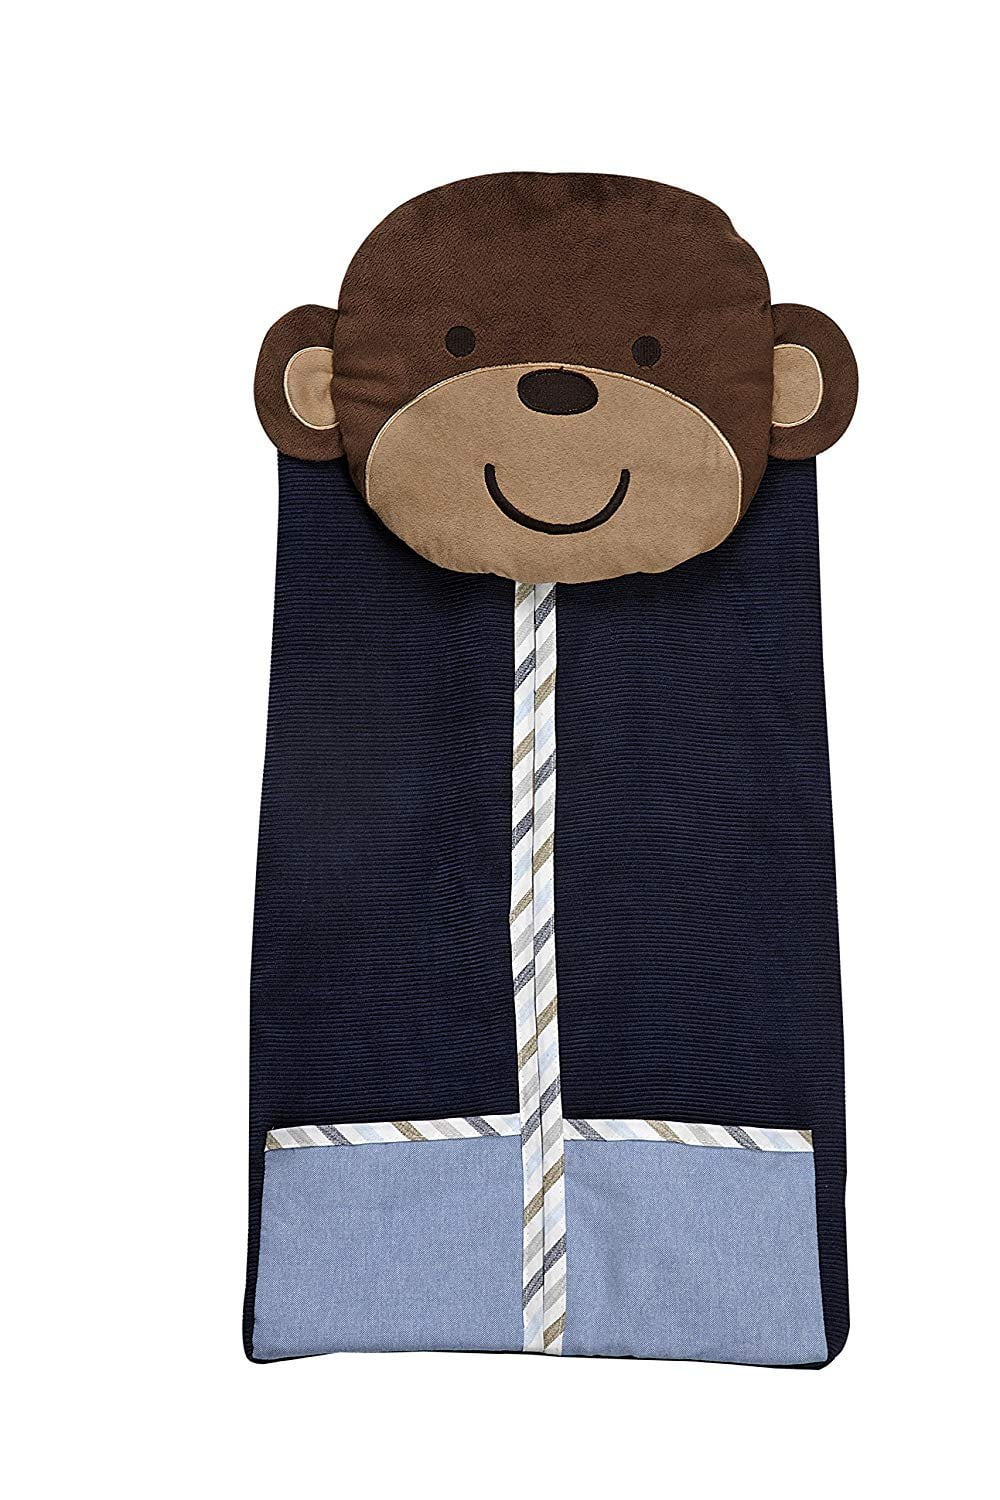 Carter's Monkey Collection Diaper Stacker 